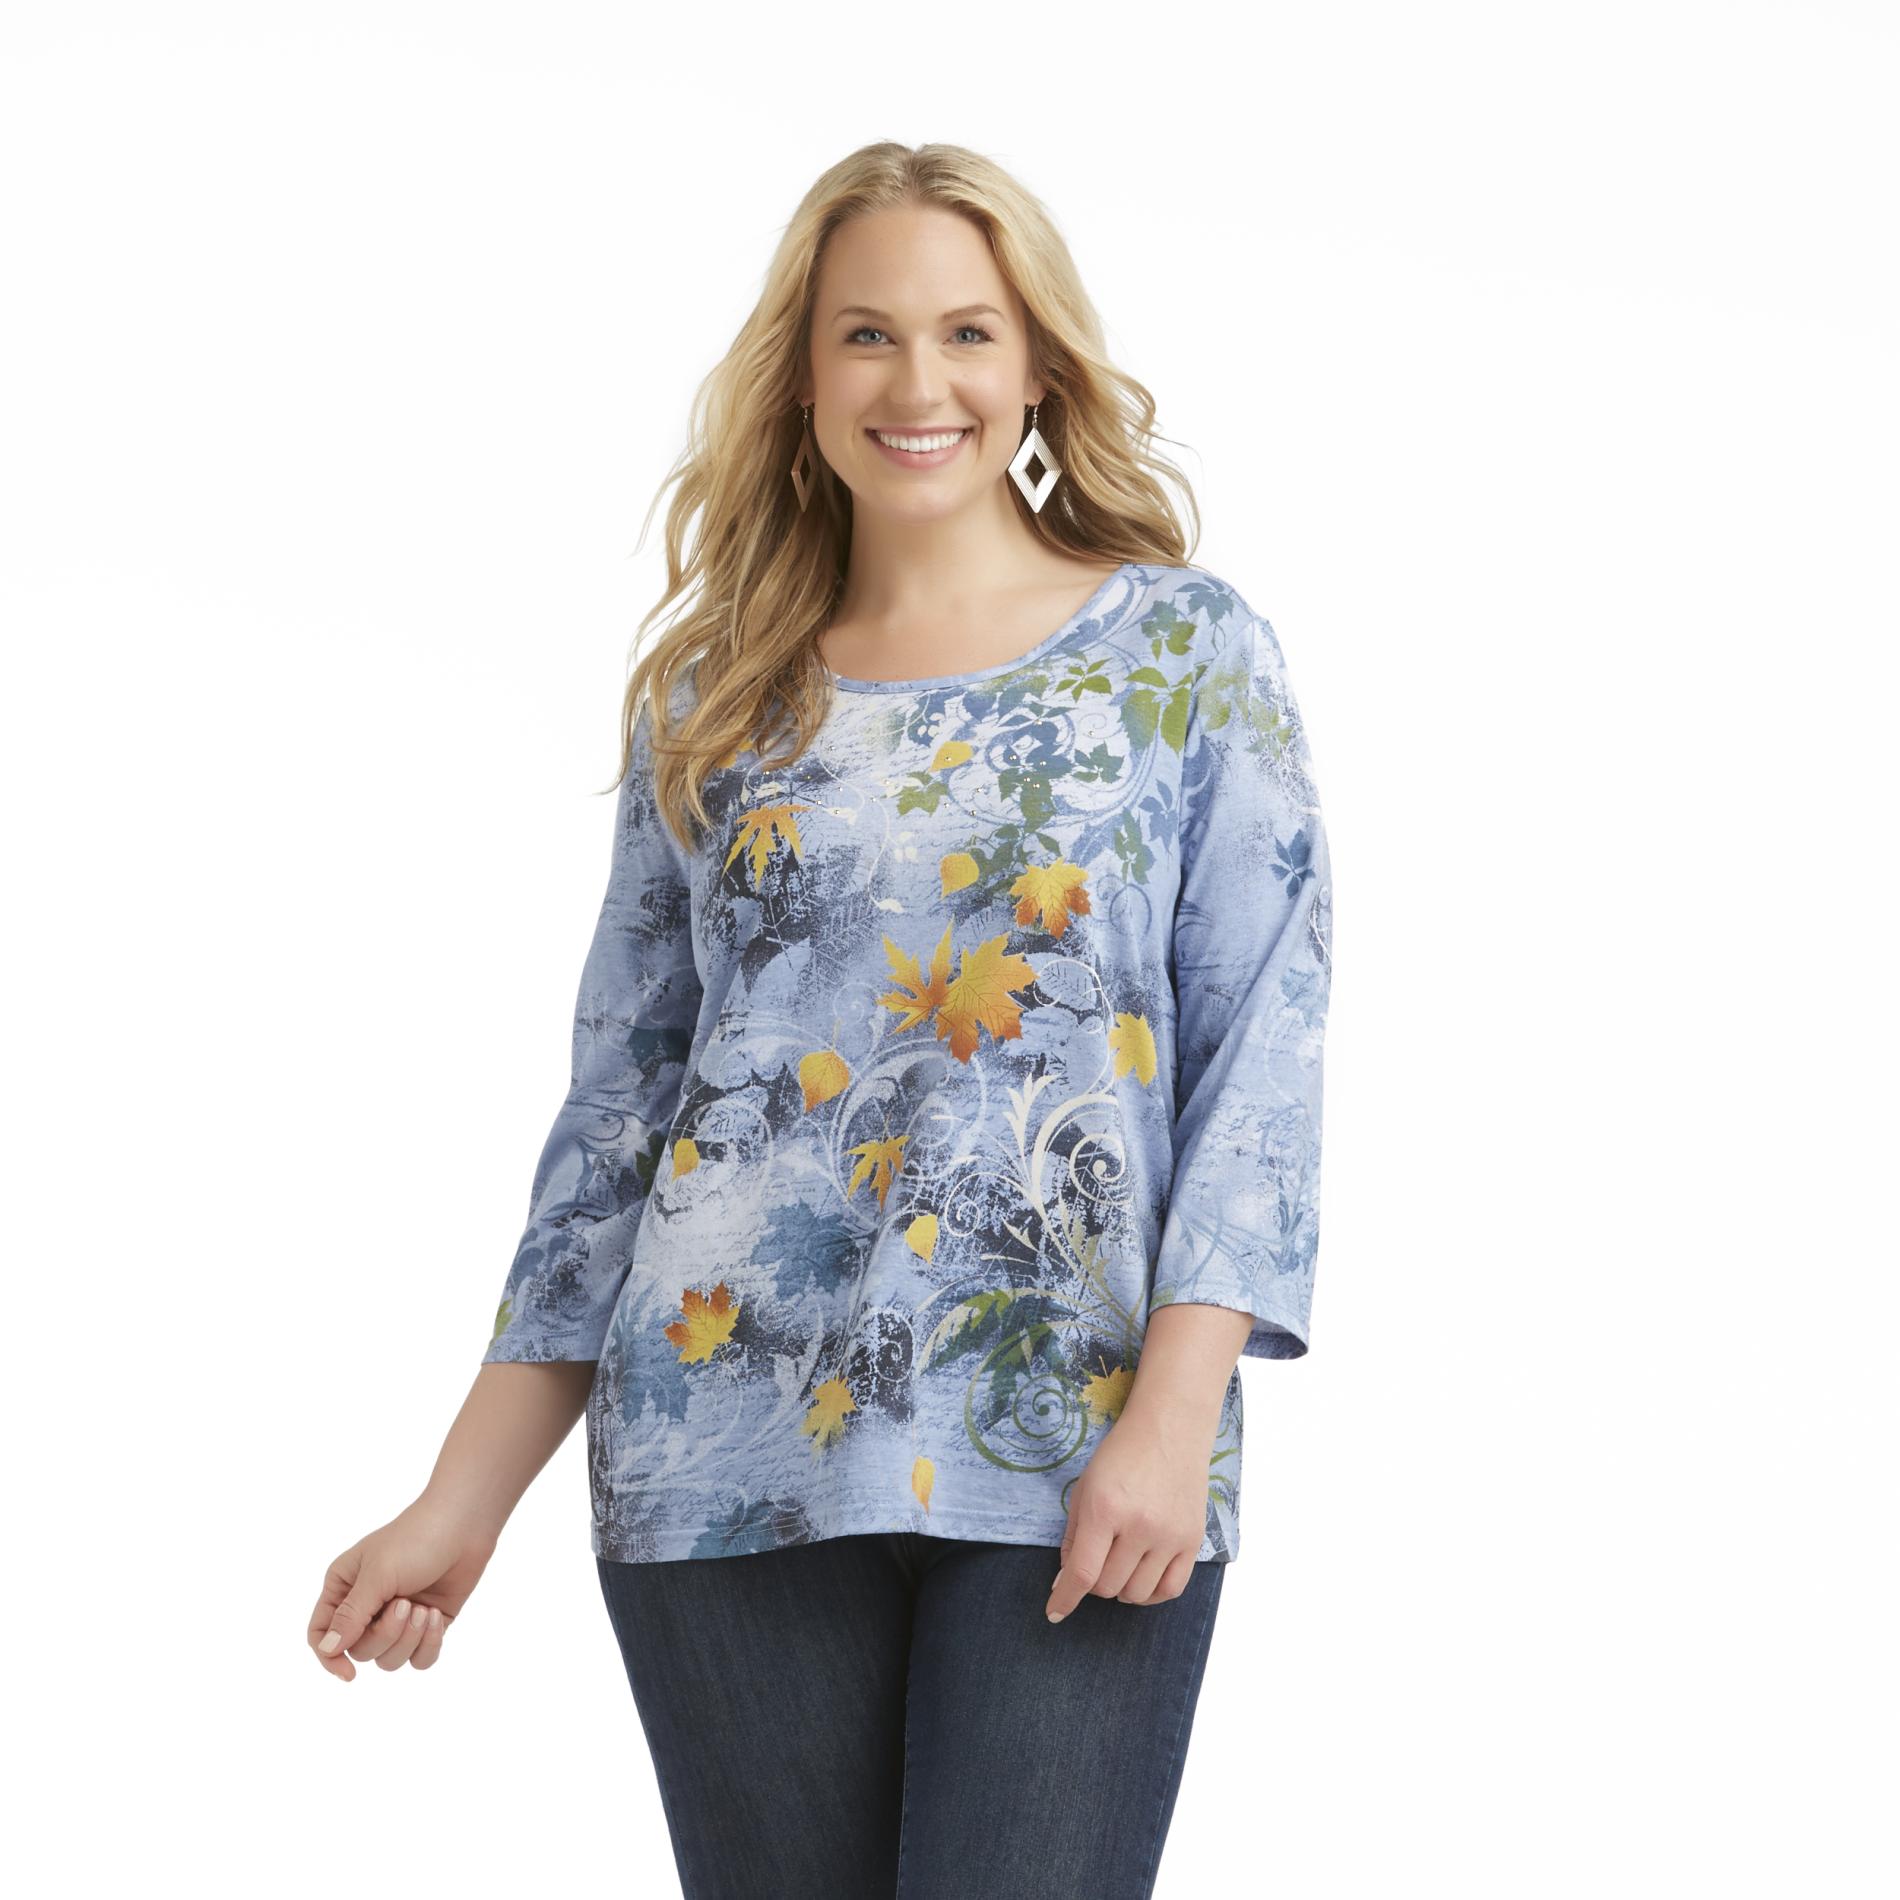 Basic Editions Women's Plus Top - Drifting Leaves